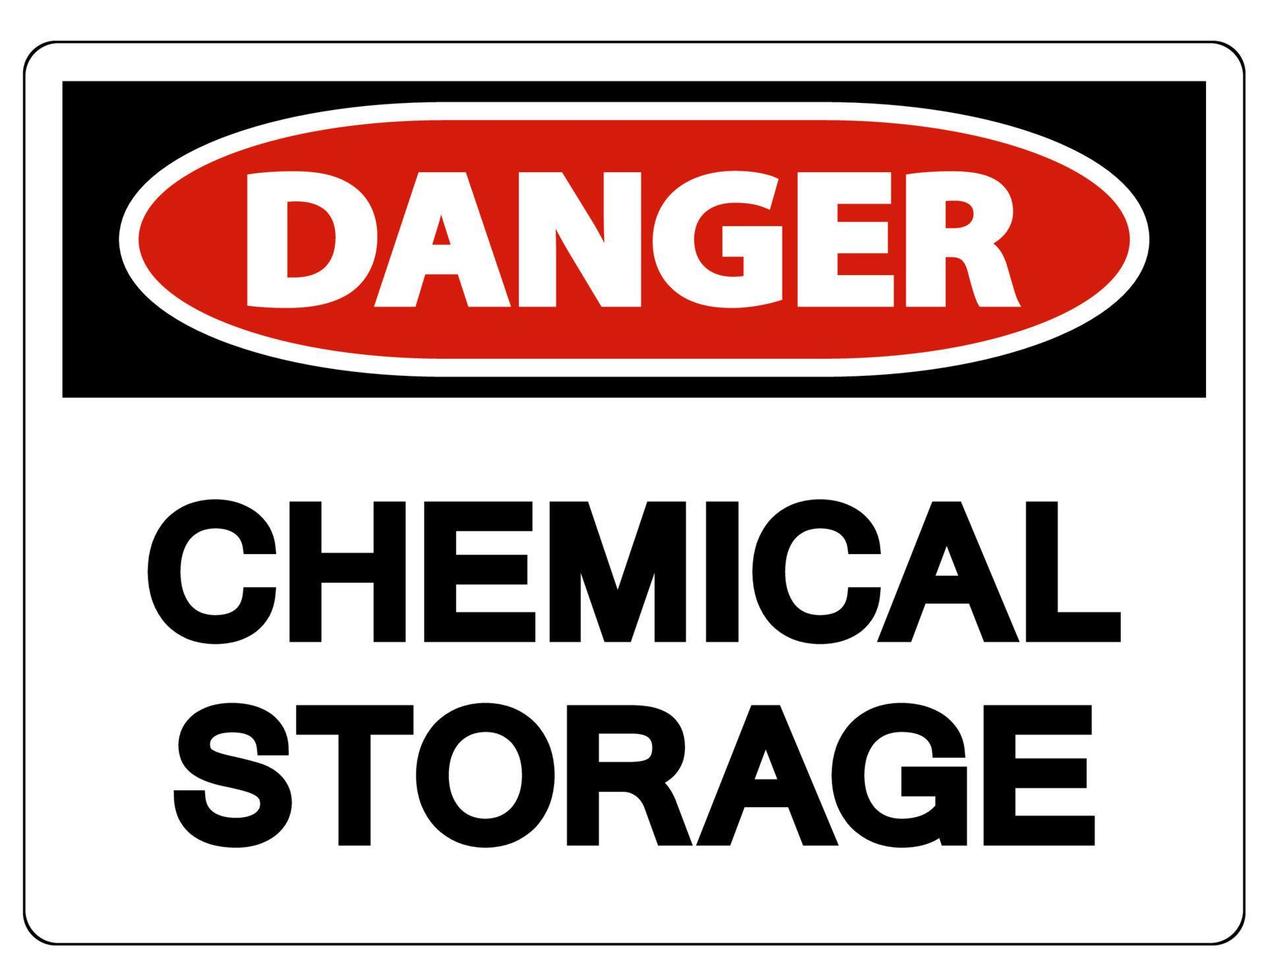 Danger Chemical Storage Sign On White Background vector